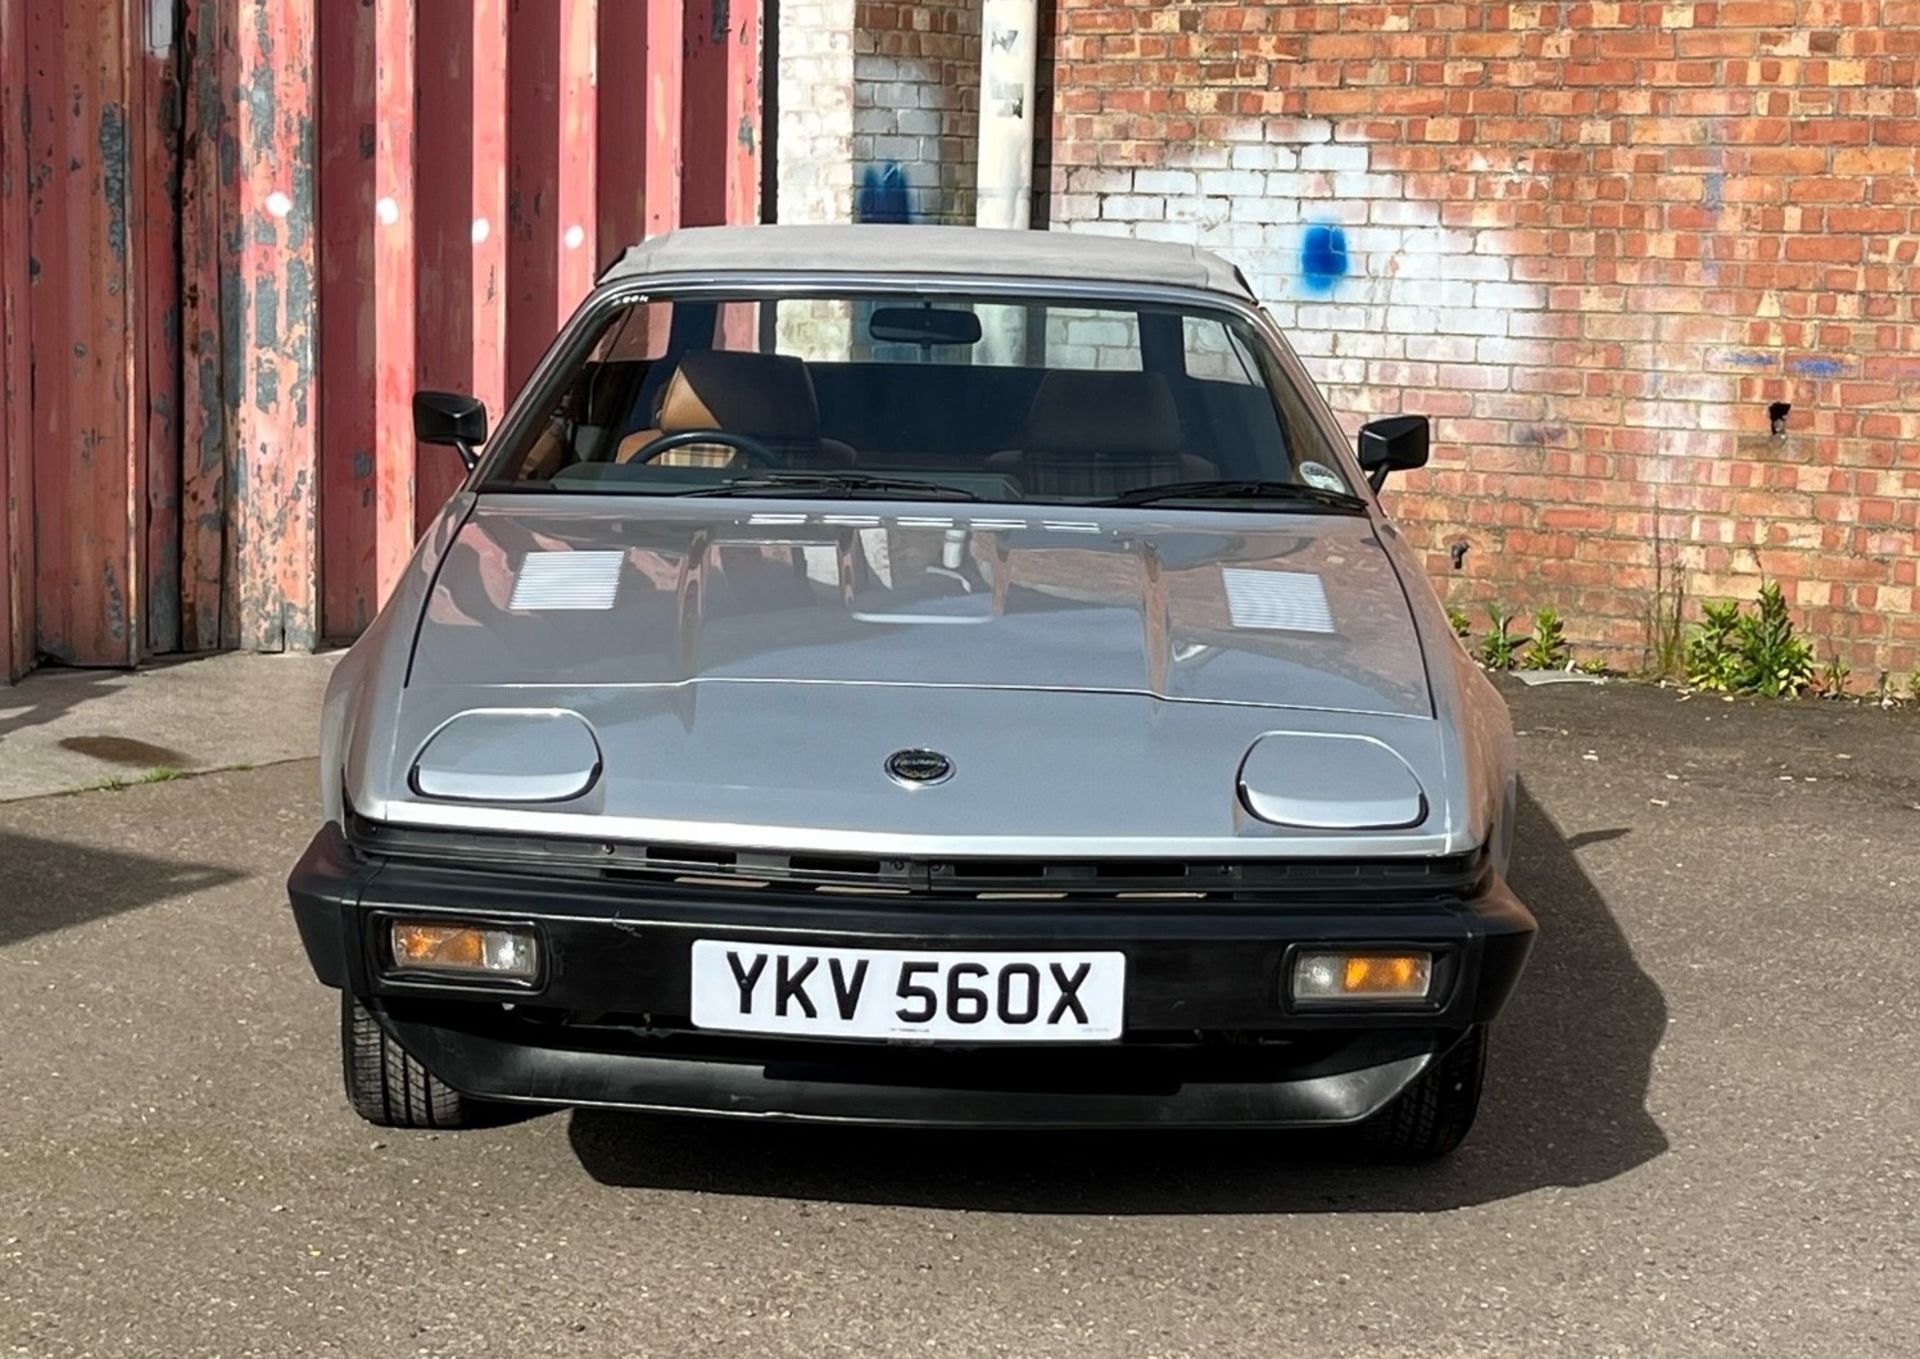 1982 Triumph TR7 Convertible Registration number YKV 560X Chassis number SATTPADJ7AA407800 - Image 2 of 16